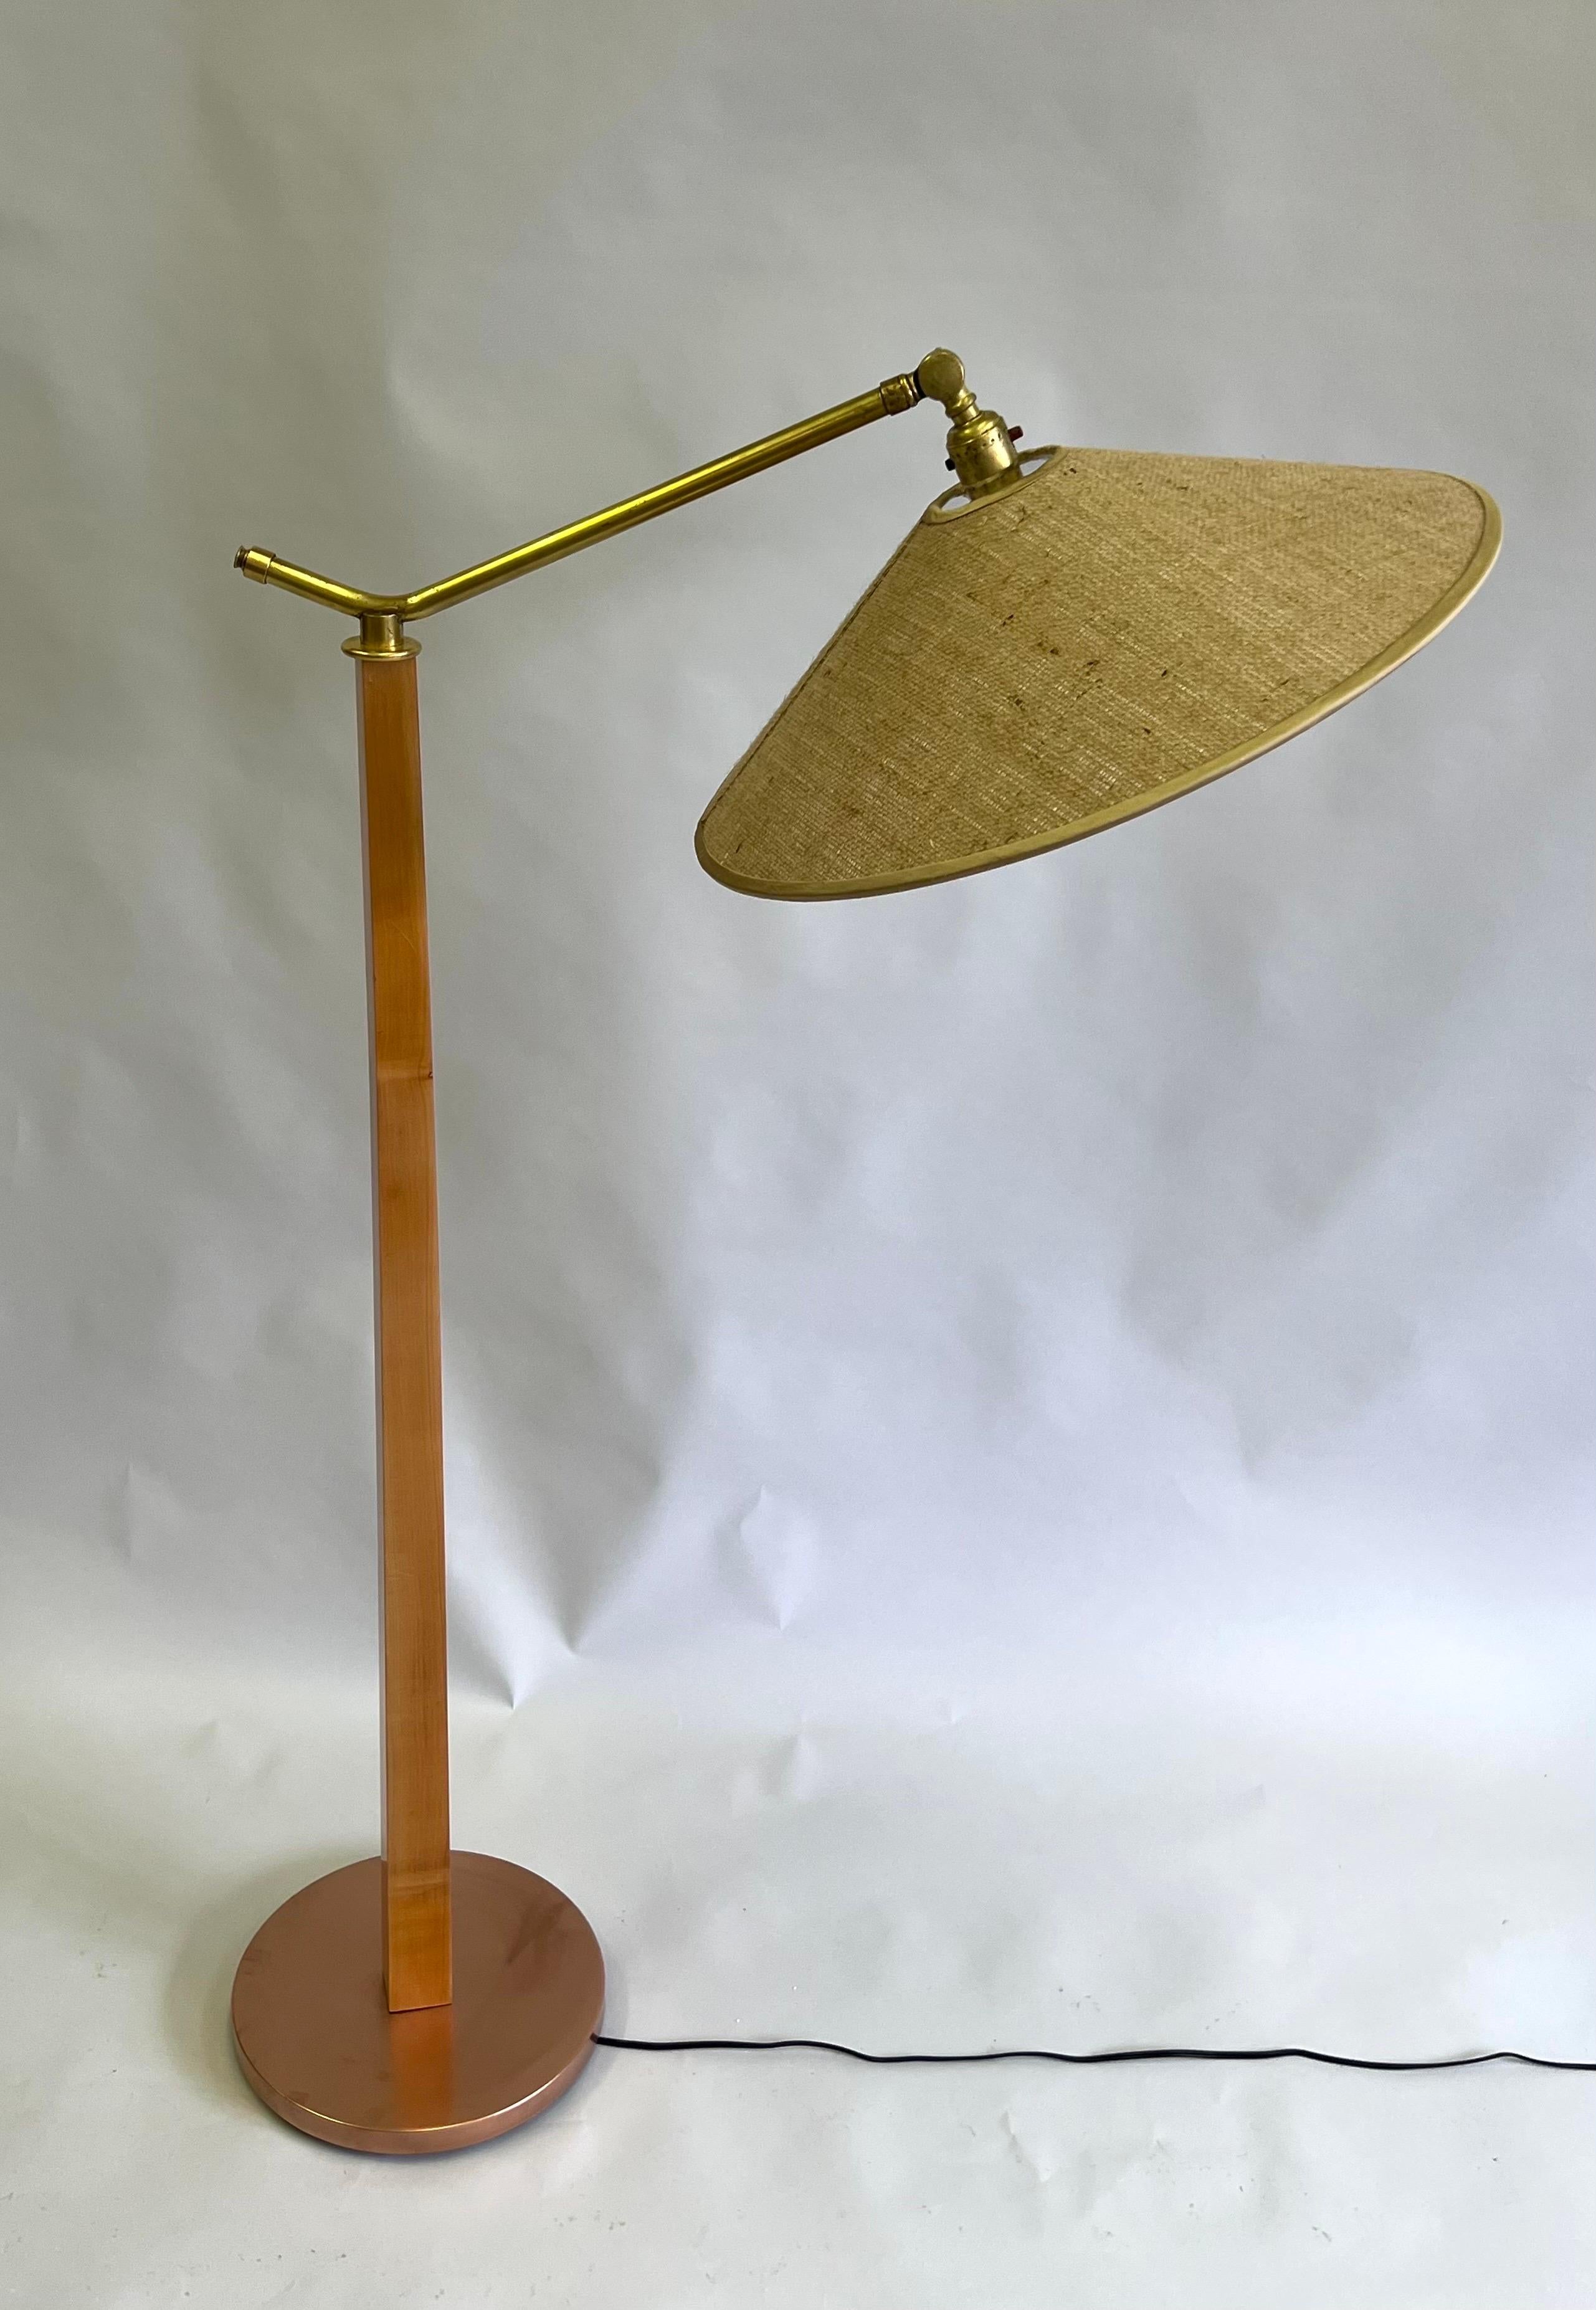 Hand-Crafted Pair Studio Craft / Modern Craftsman Floor Lamps, Pierre Guariche, 1947 For Sale